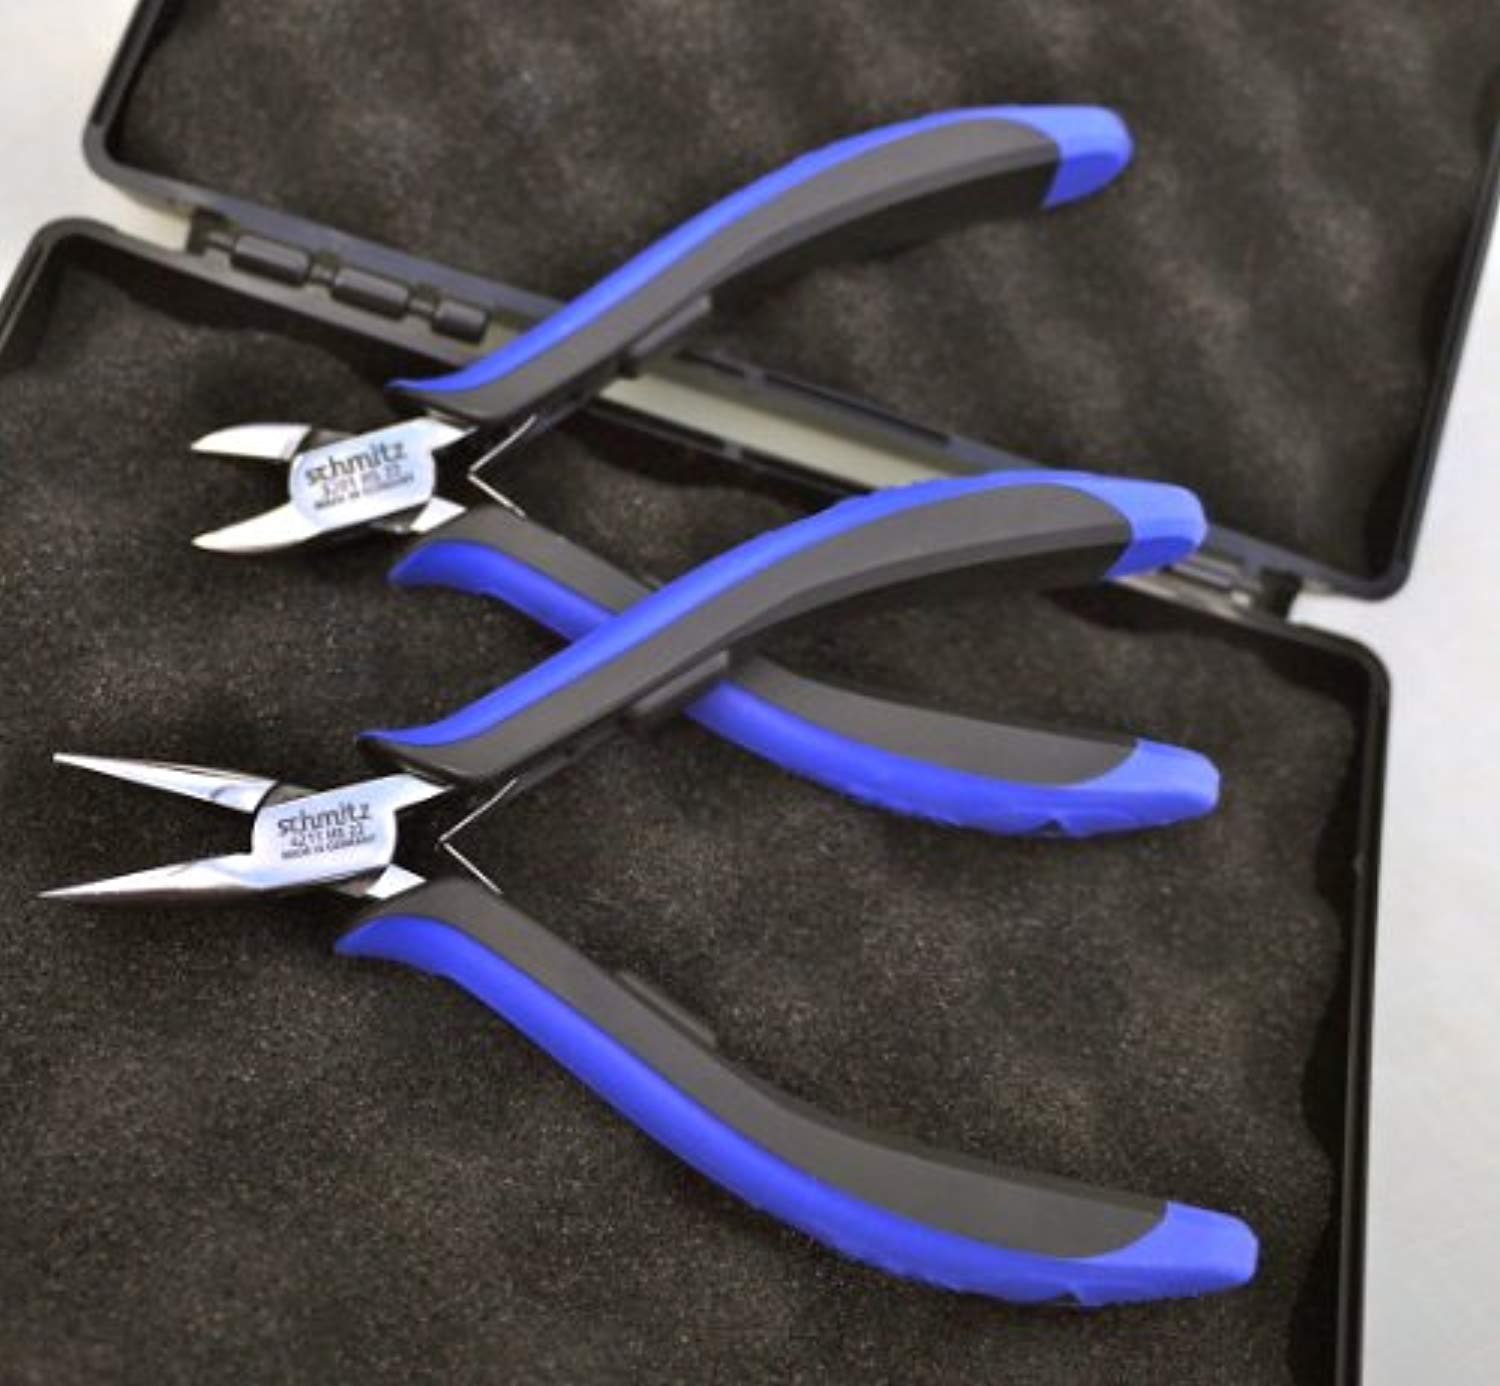 Pliers-Set - ESD-Tool Case with 2 pliers 3201HS22 & 4211HS22 - ESD-Dis –  schmitz pliers and cutters